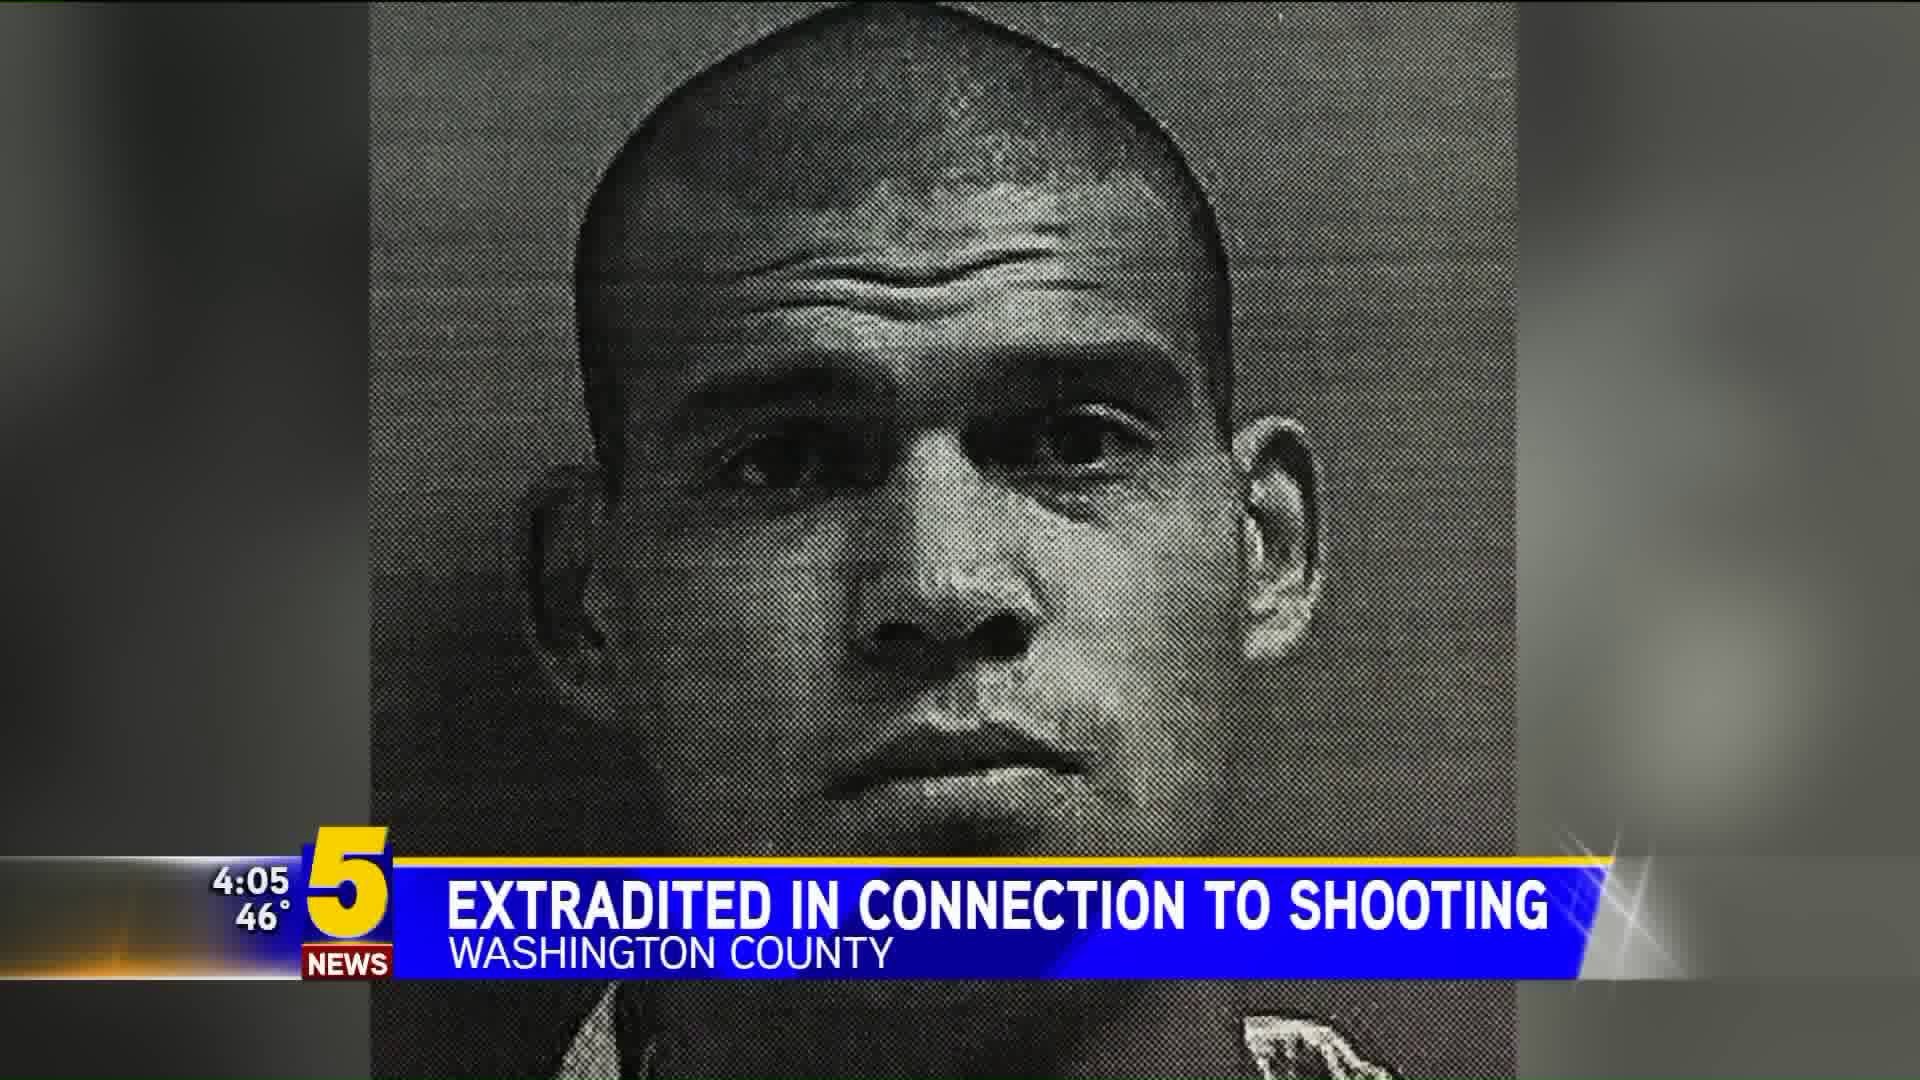 Man Extradited In Connection To Shooting